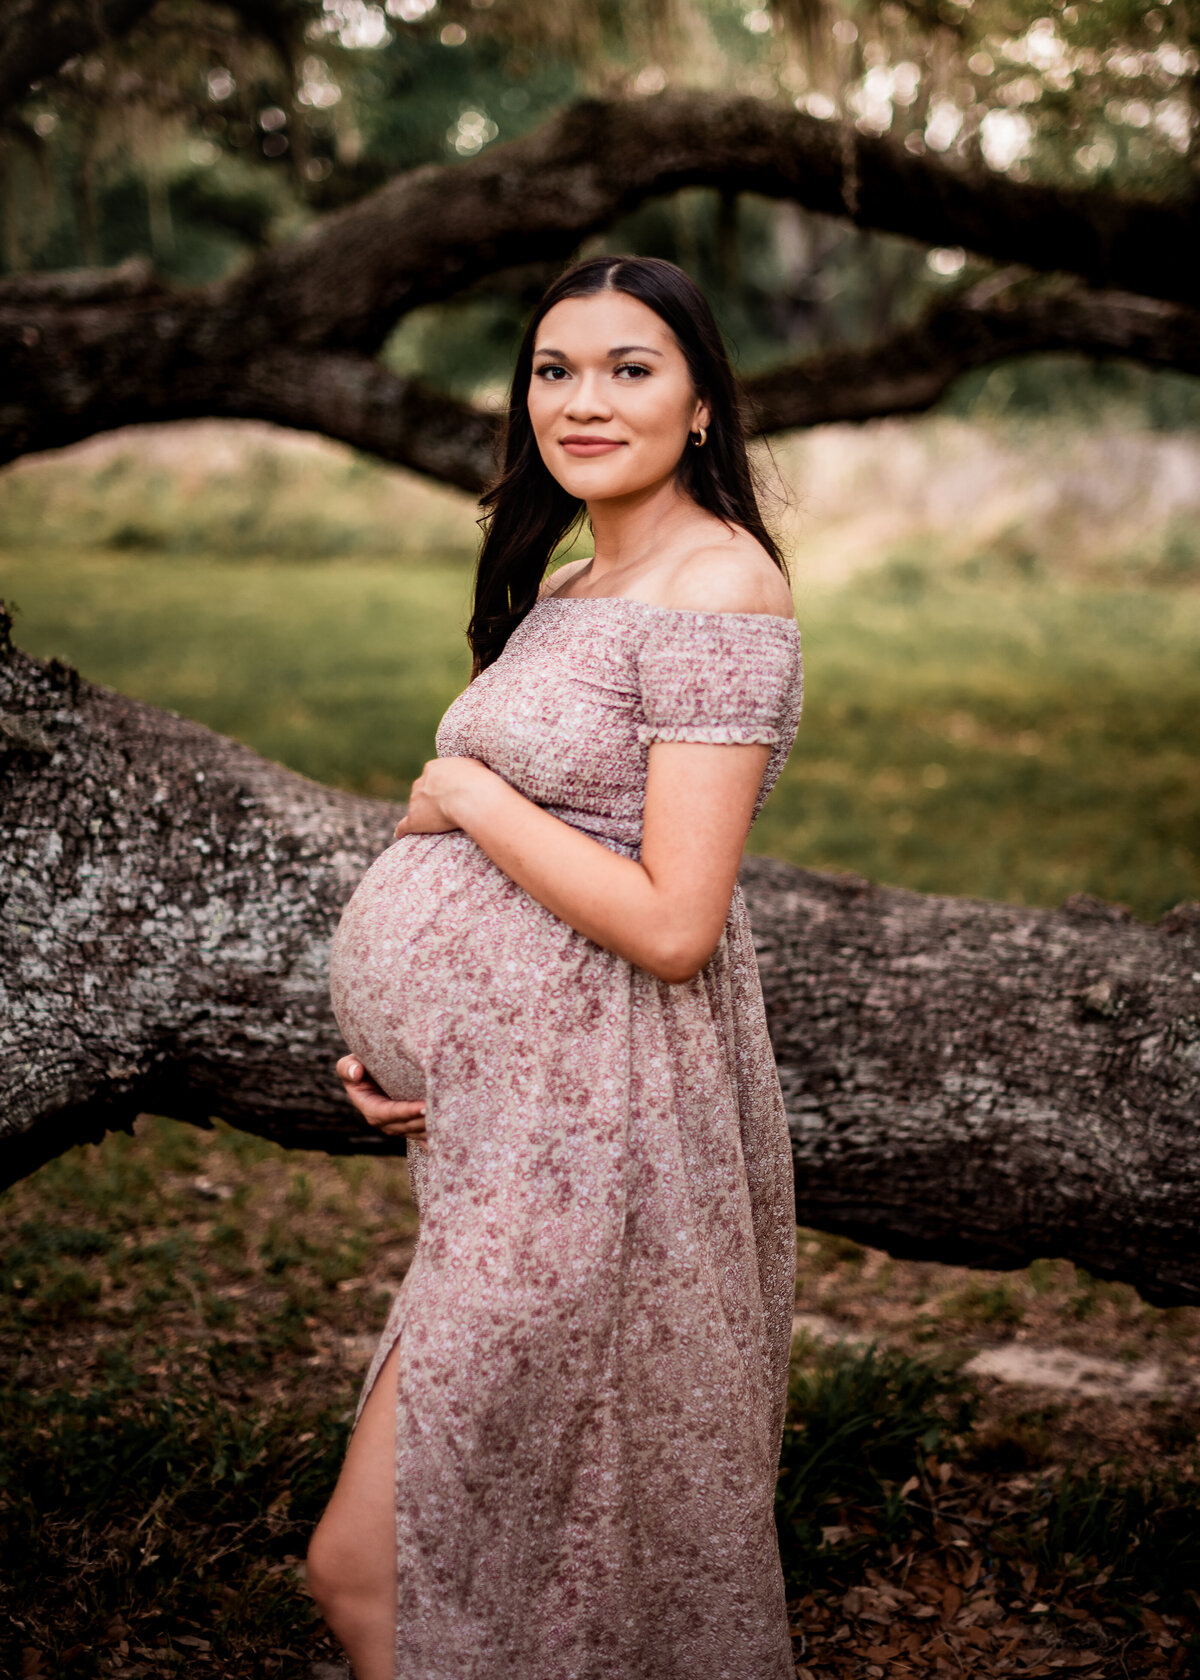 A pregnant woman stands sideways and holds her bump while she smiles at the camera.